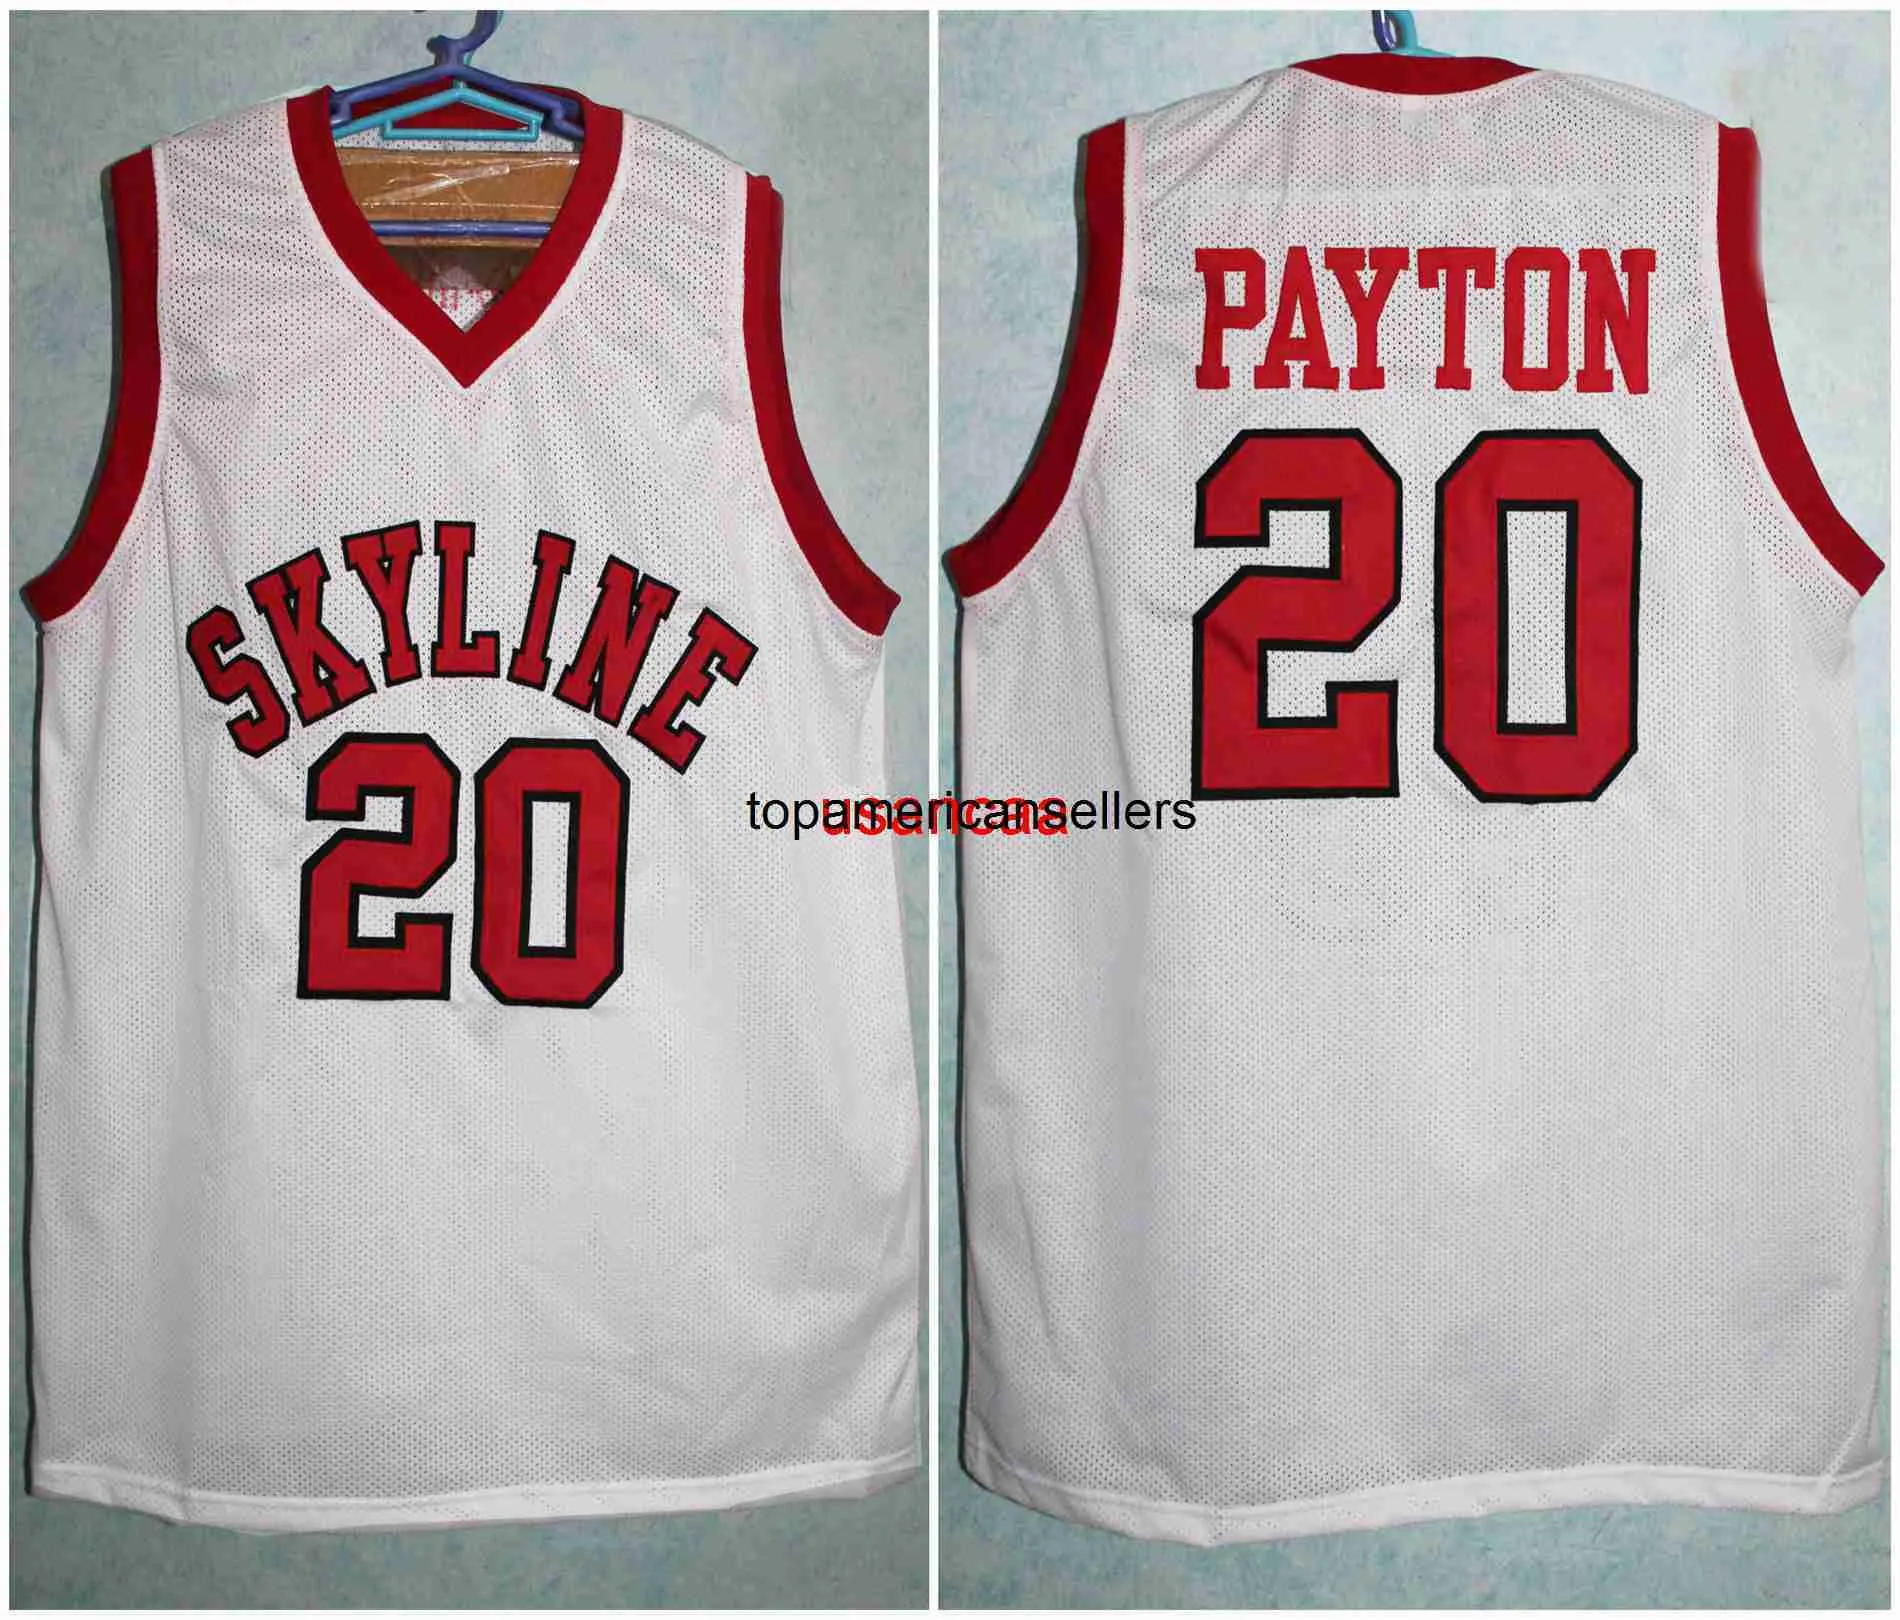 Skyline High School 20 Gary Payton Retro Classic Basketball Jersey Mens Number Nume Nume Name Proteys